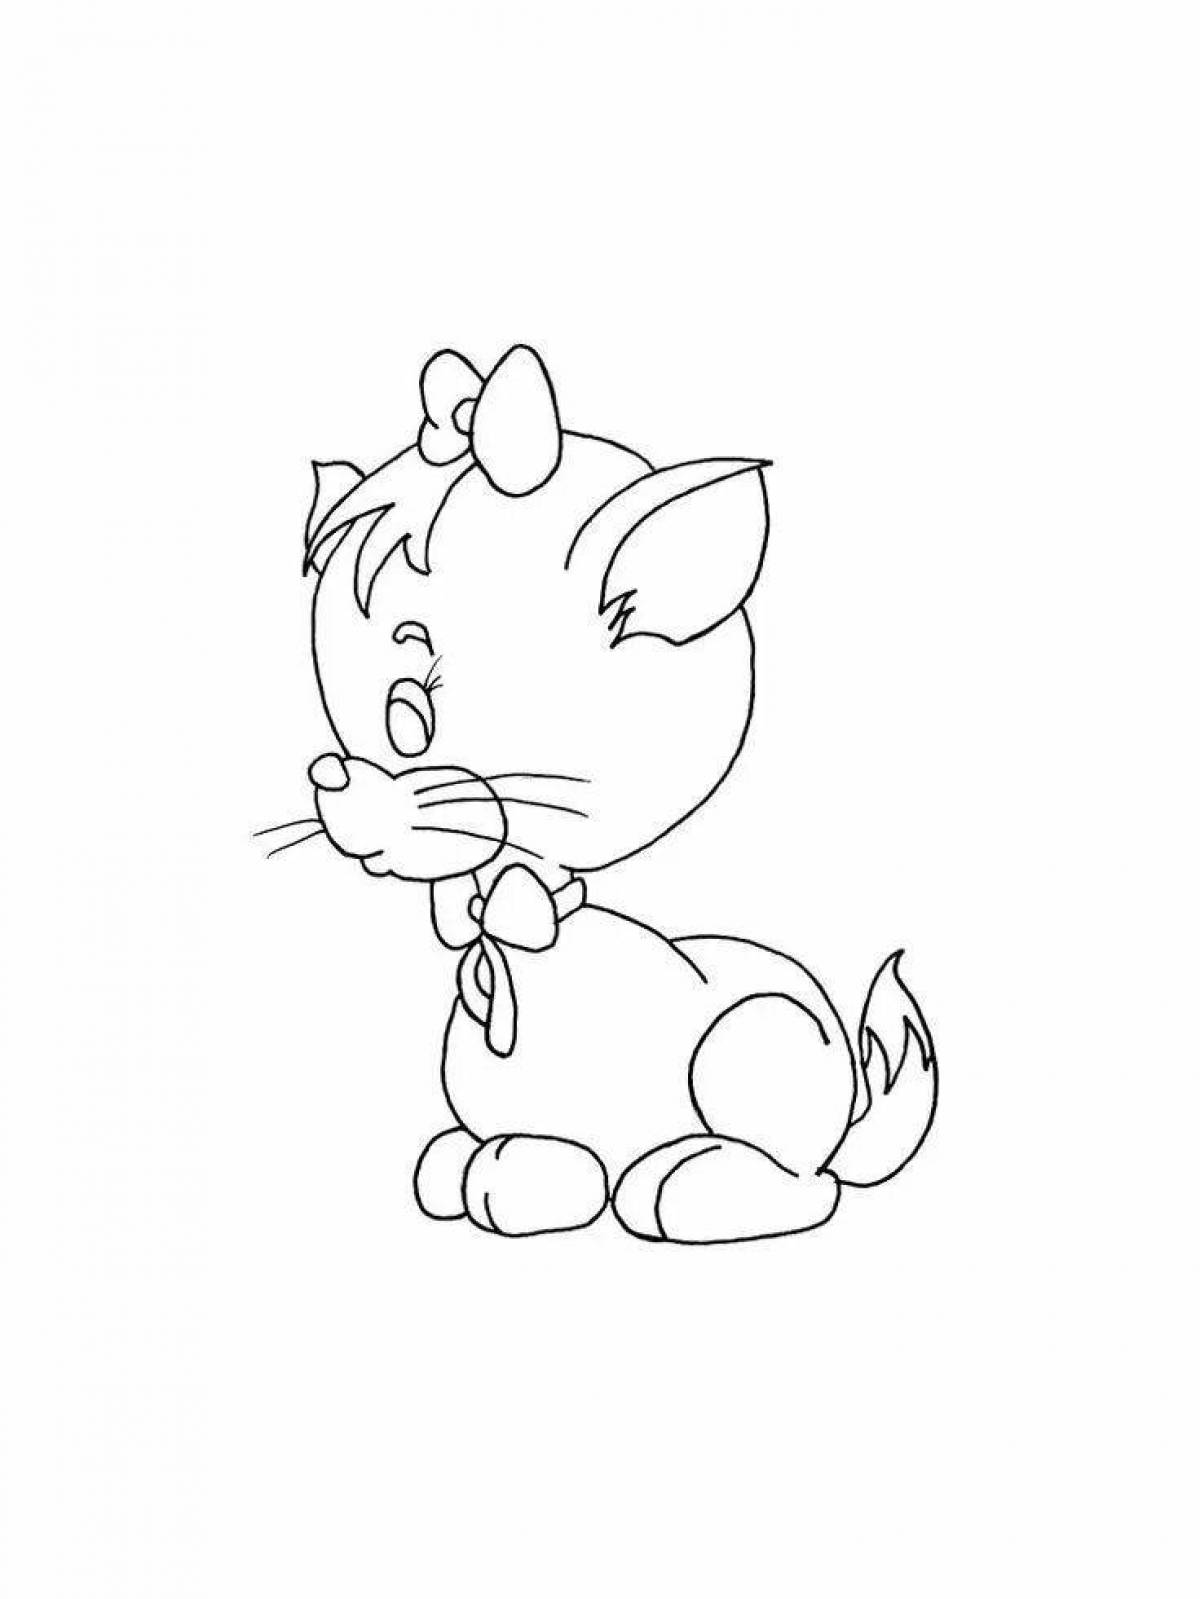 Colorful cat coloring page for kids